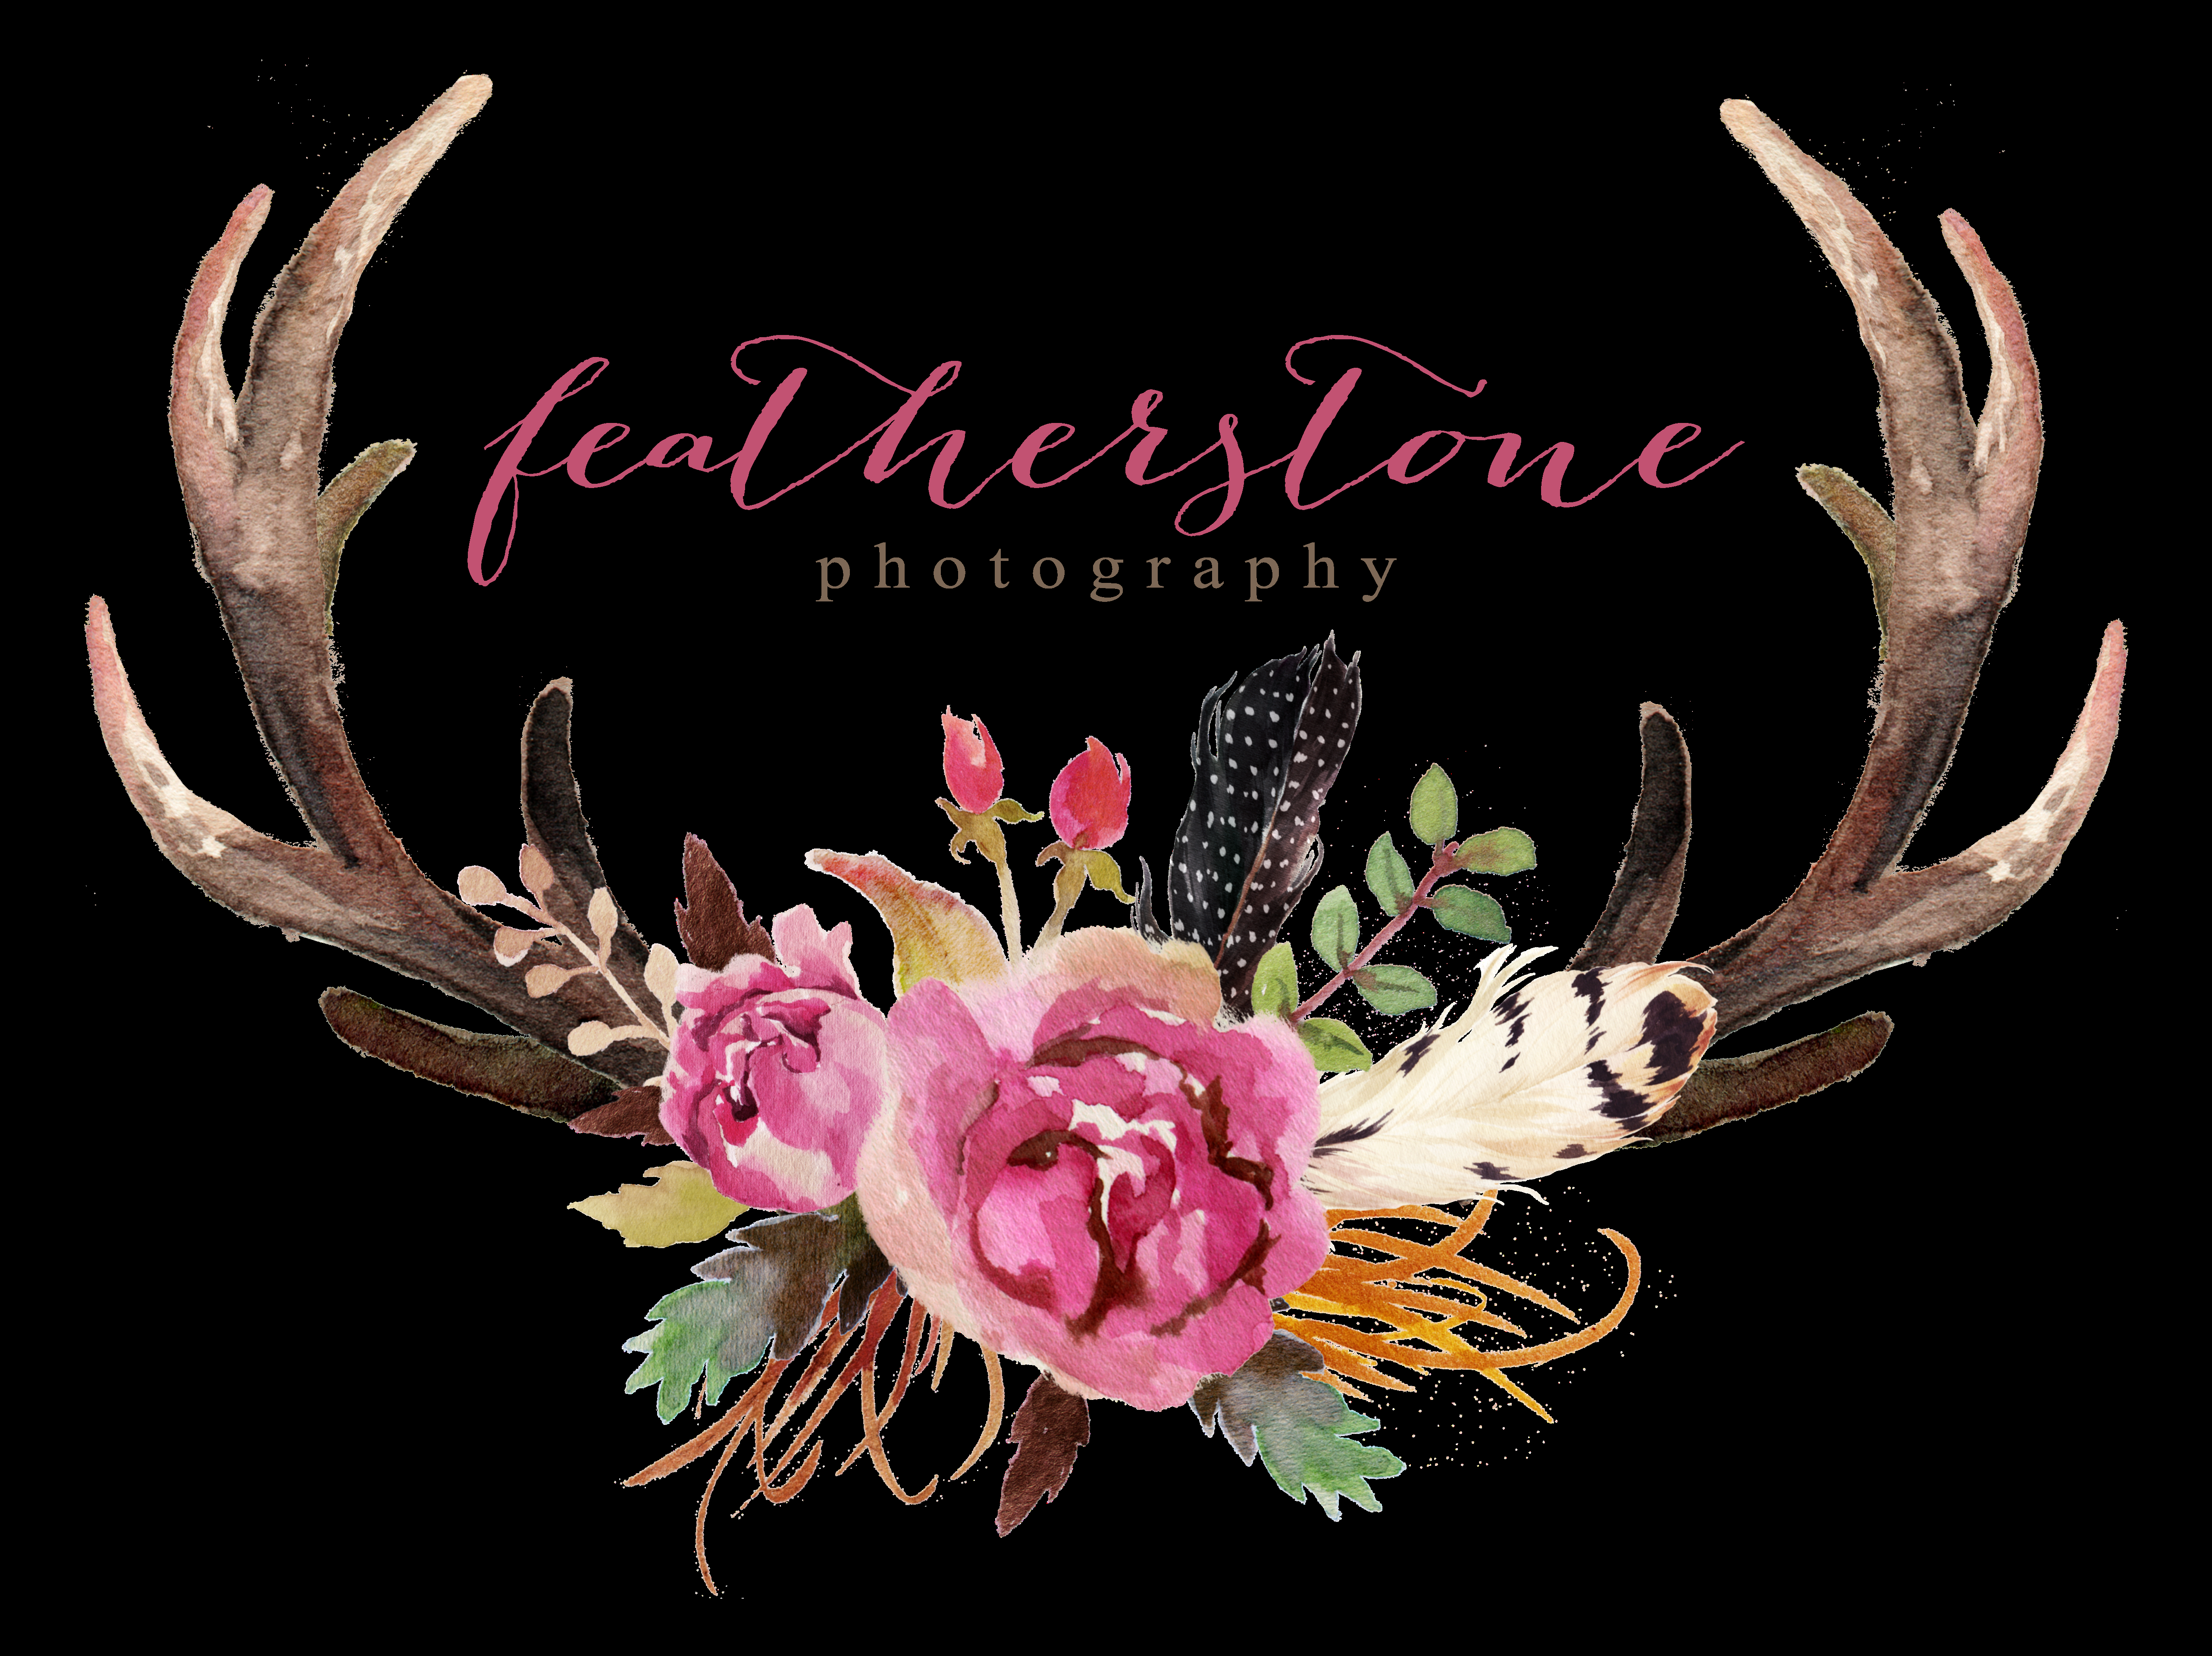 Featherstone Photography